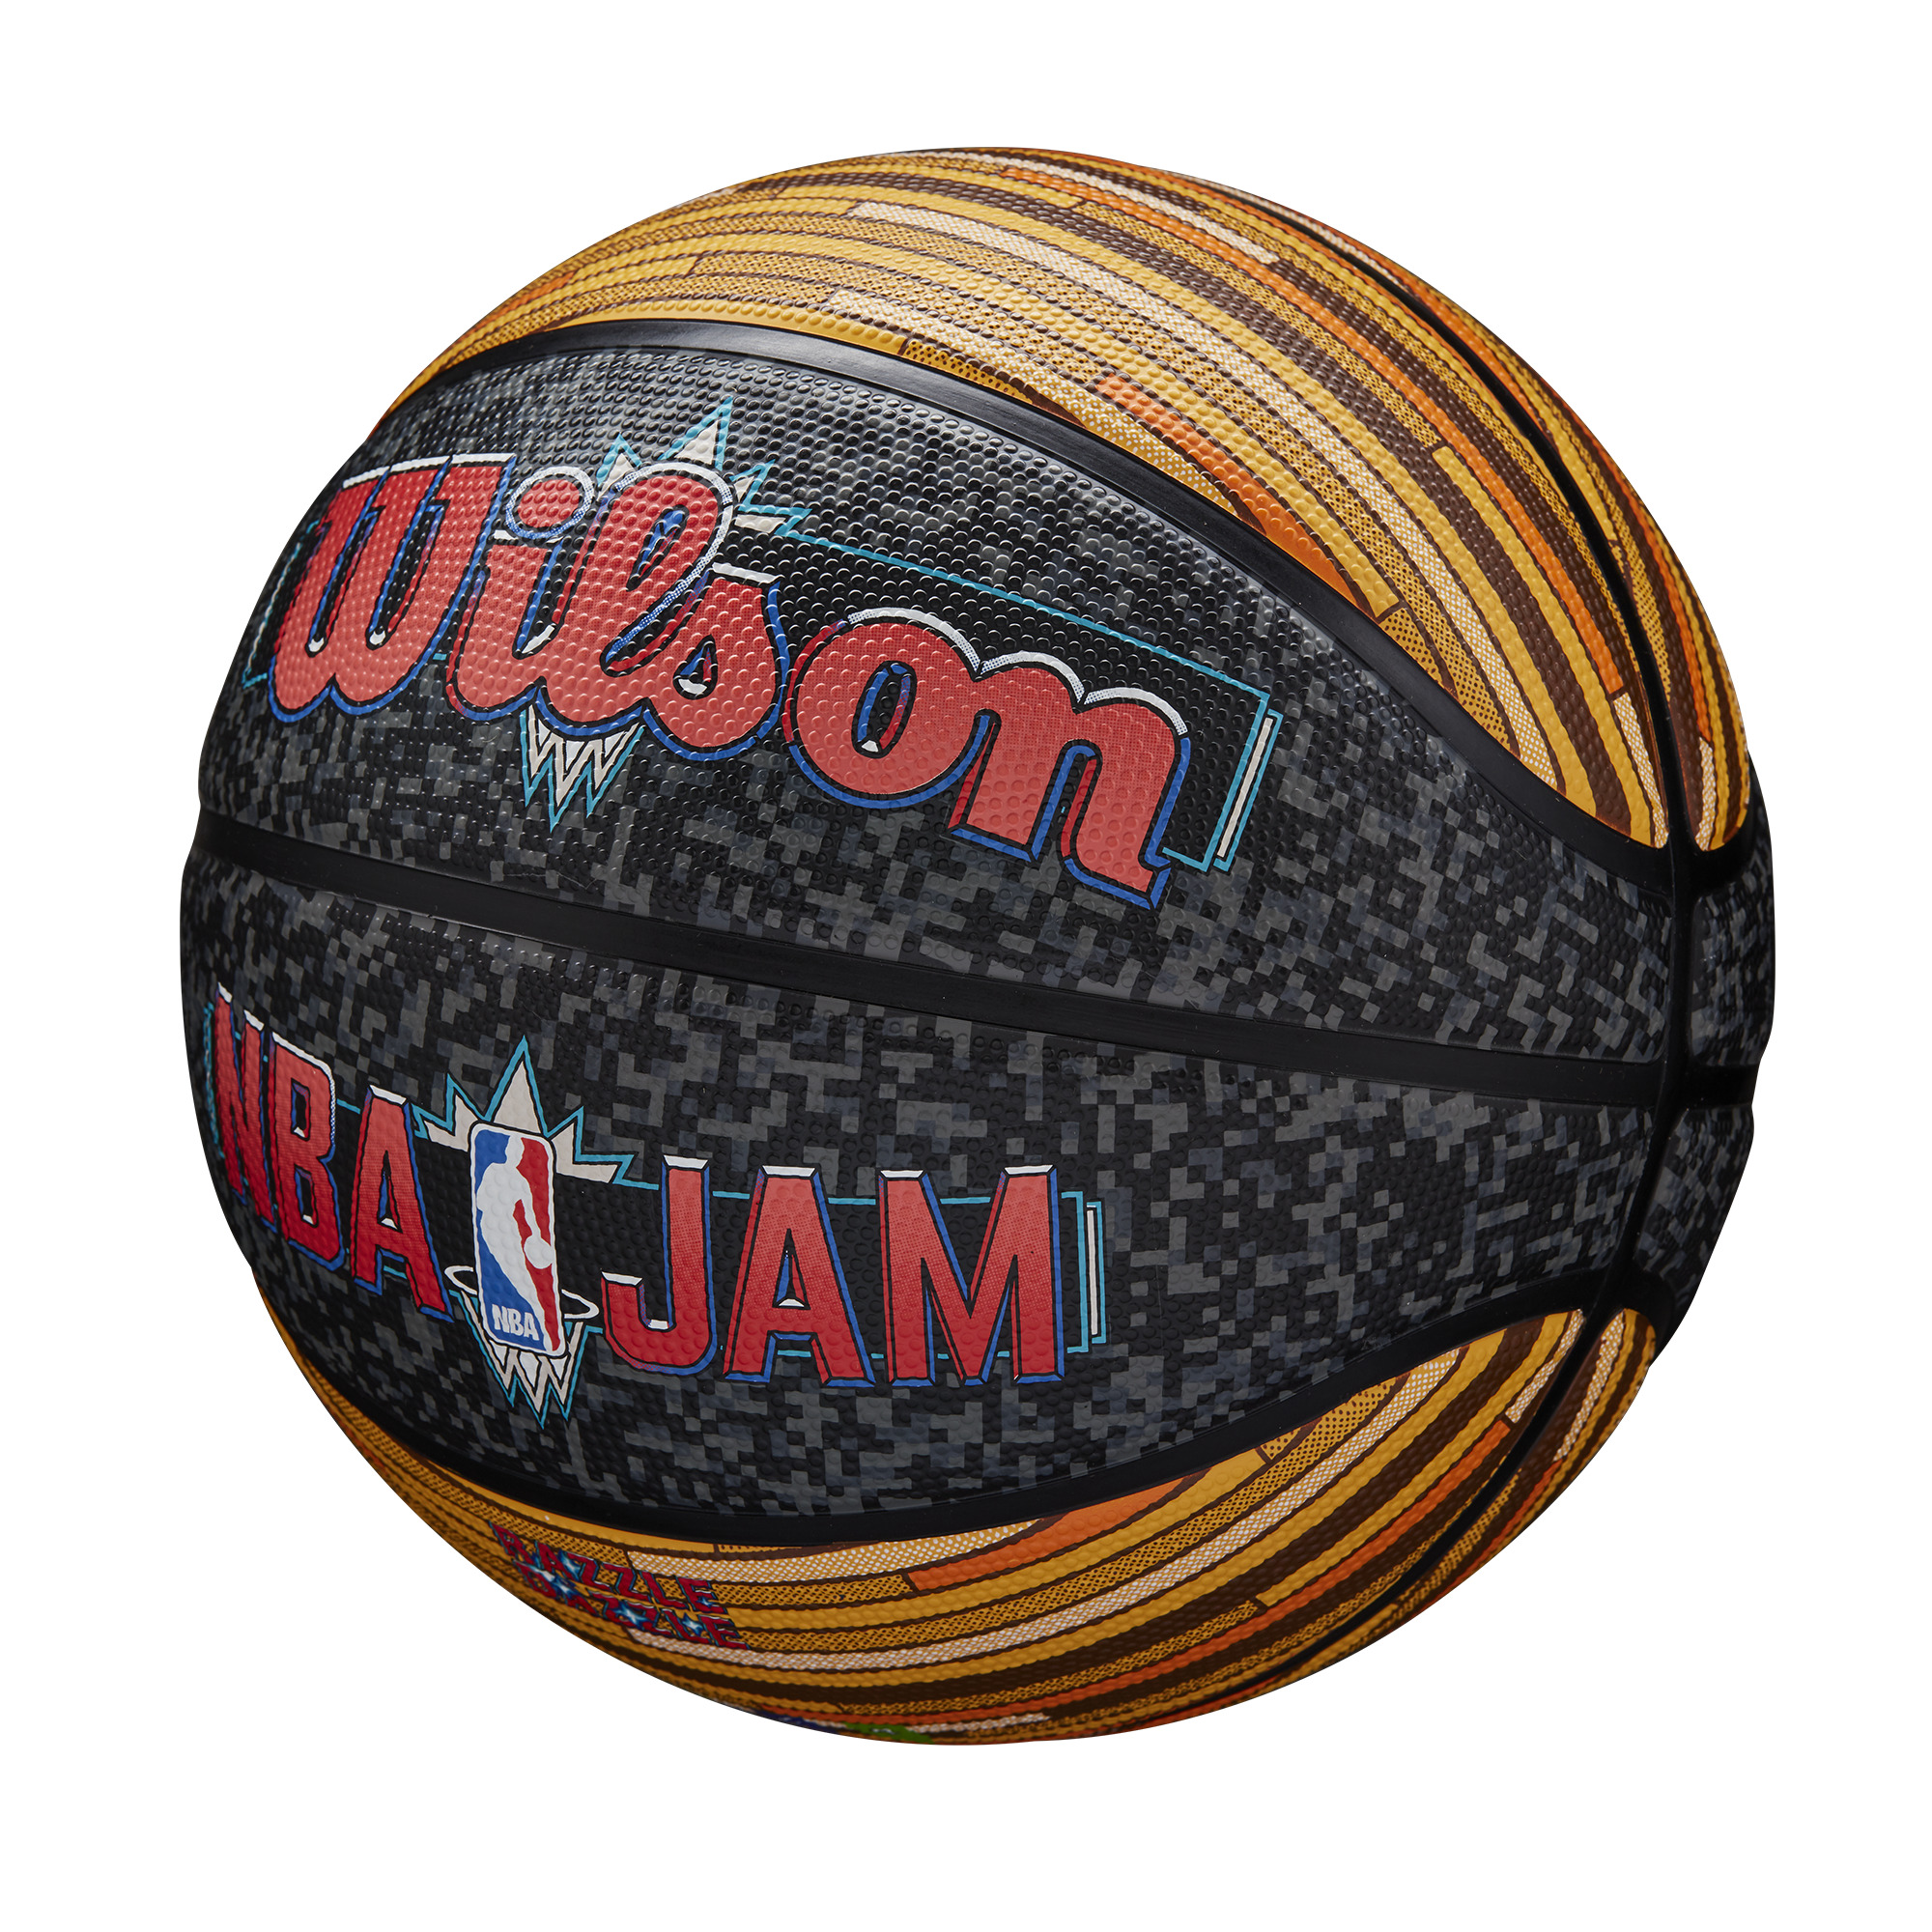 WZ3013801ID_2_7_NBA_JAM_OUTDOOR_BSKT_295_BL_GY_RD_BU_YE_BR.png.high-res